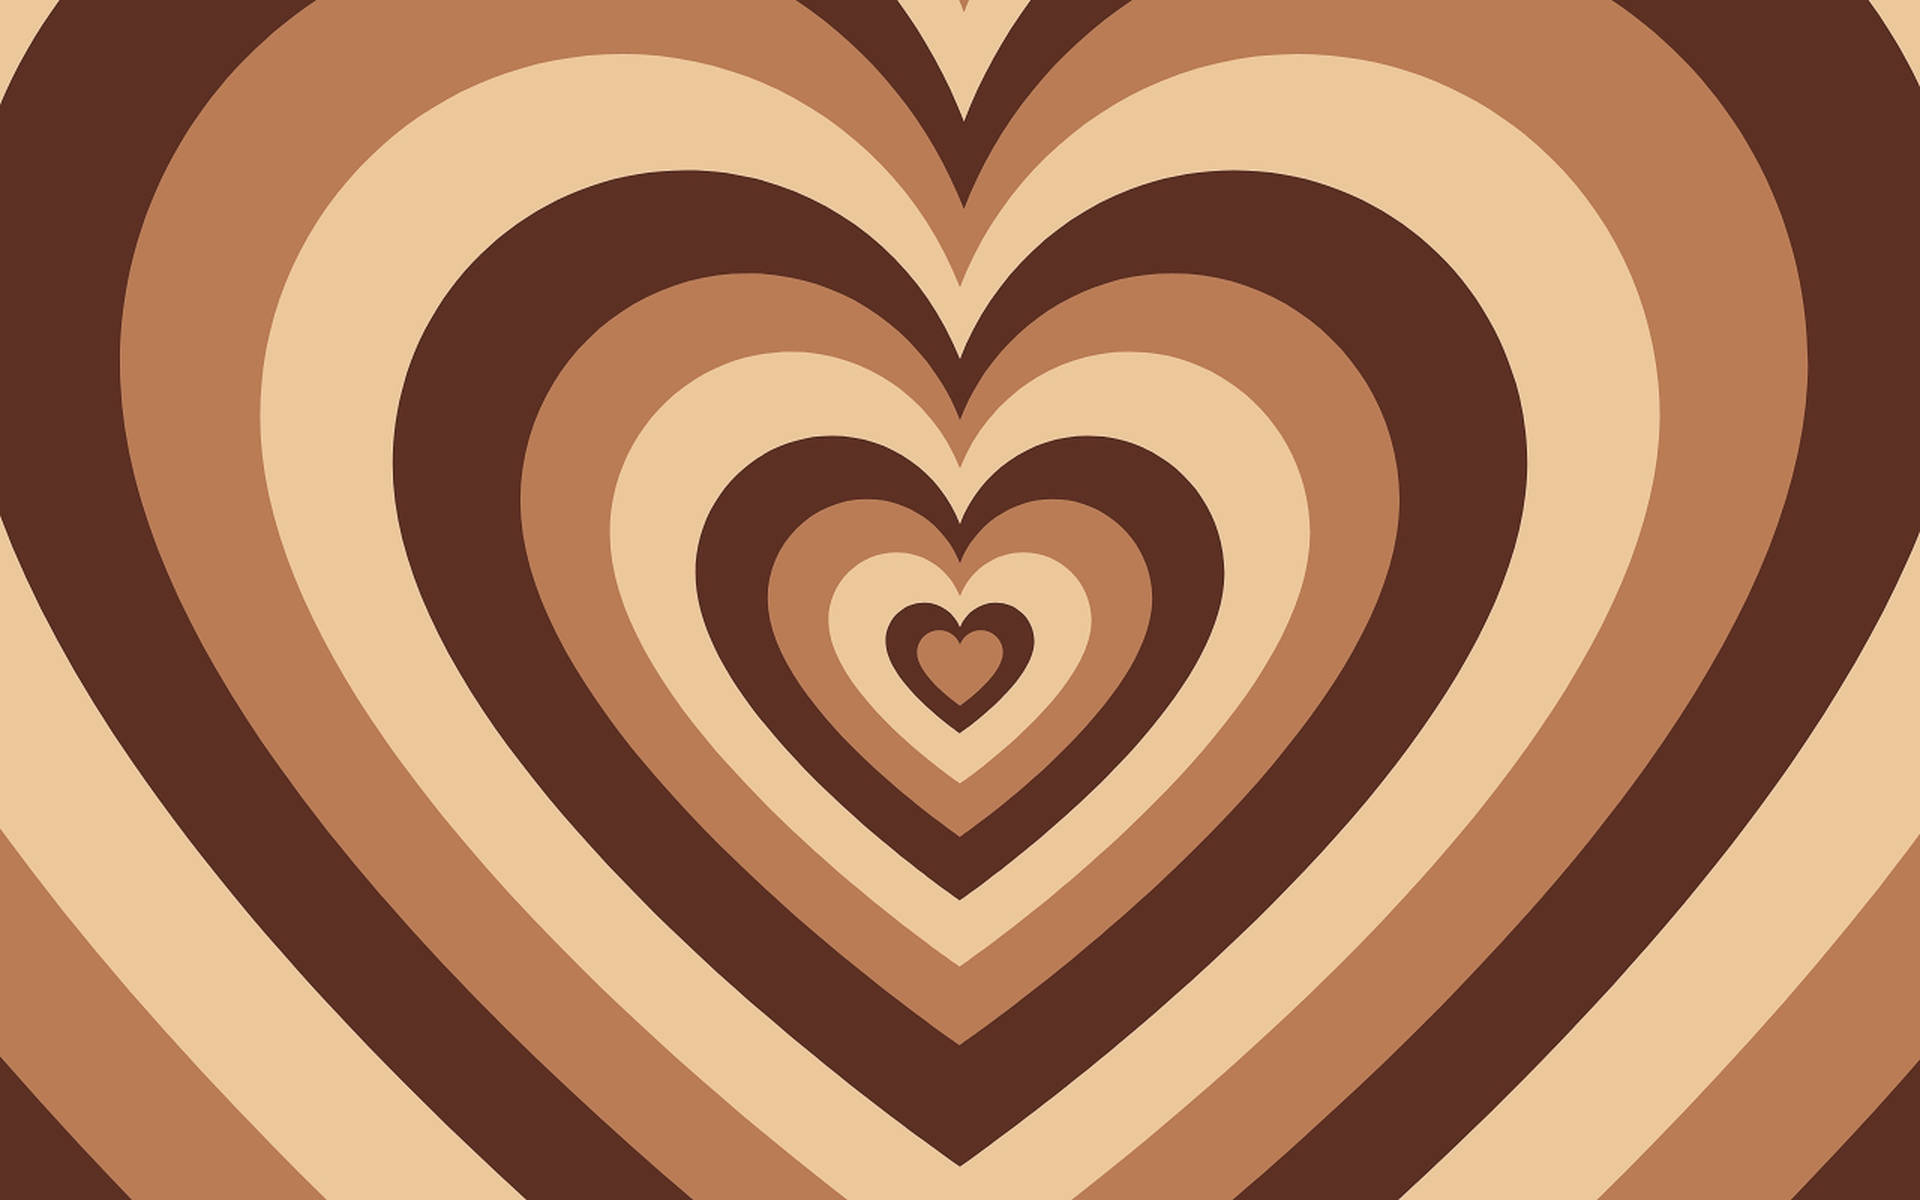 Free Brown Heart Wallpaper Downloads, [100+] Brown Heart Wallpapers for  FREE 